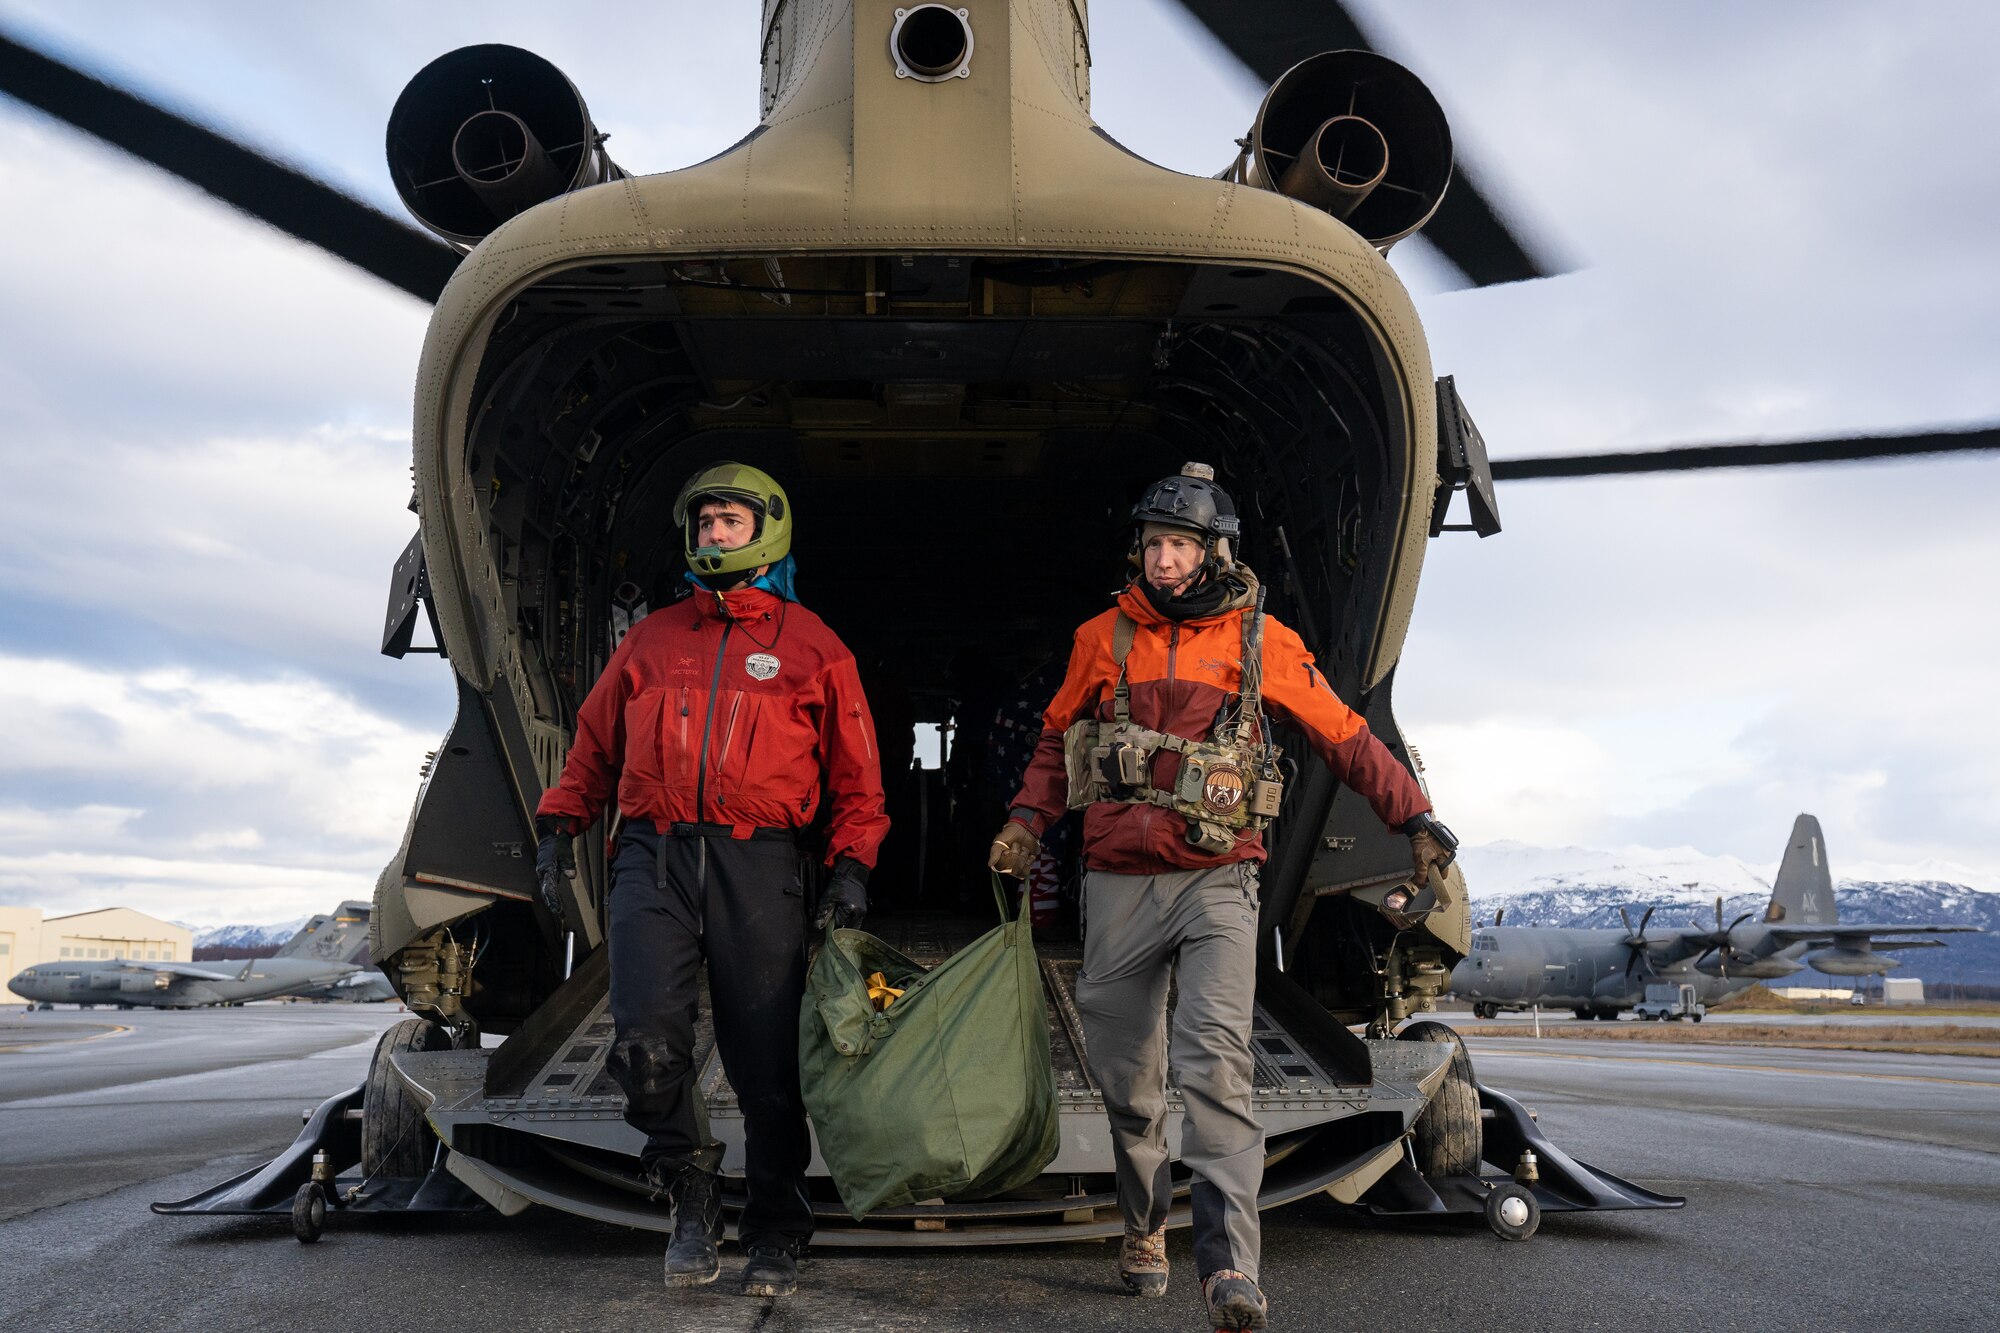 U.S. Air Force Capt. Dan Warren (left) and Maj. Miles Brodsky (right), both combat rescue officers assigned to the 212th Rescue Squadron, depart a CH-47J Chinook operated by Detachment 1, Bravo Company, 2-211th General Service Aviation Battalion, Army National Guard, after a training event at Joint Base Elmendorf-Richardson, Alaska.